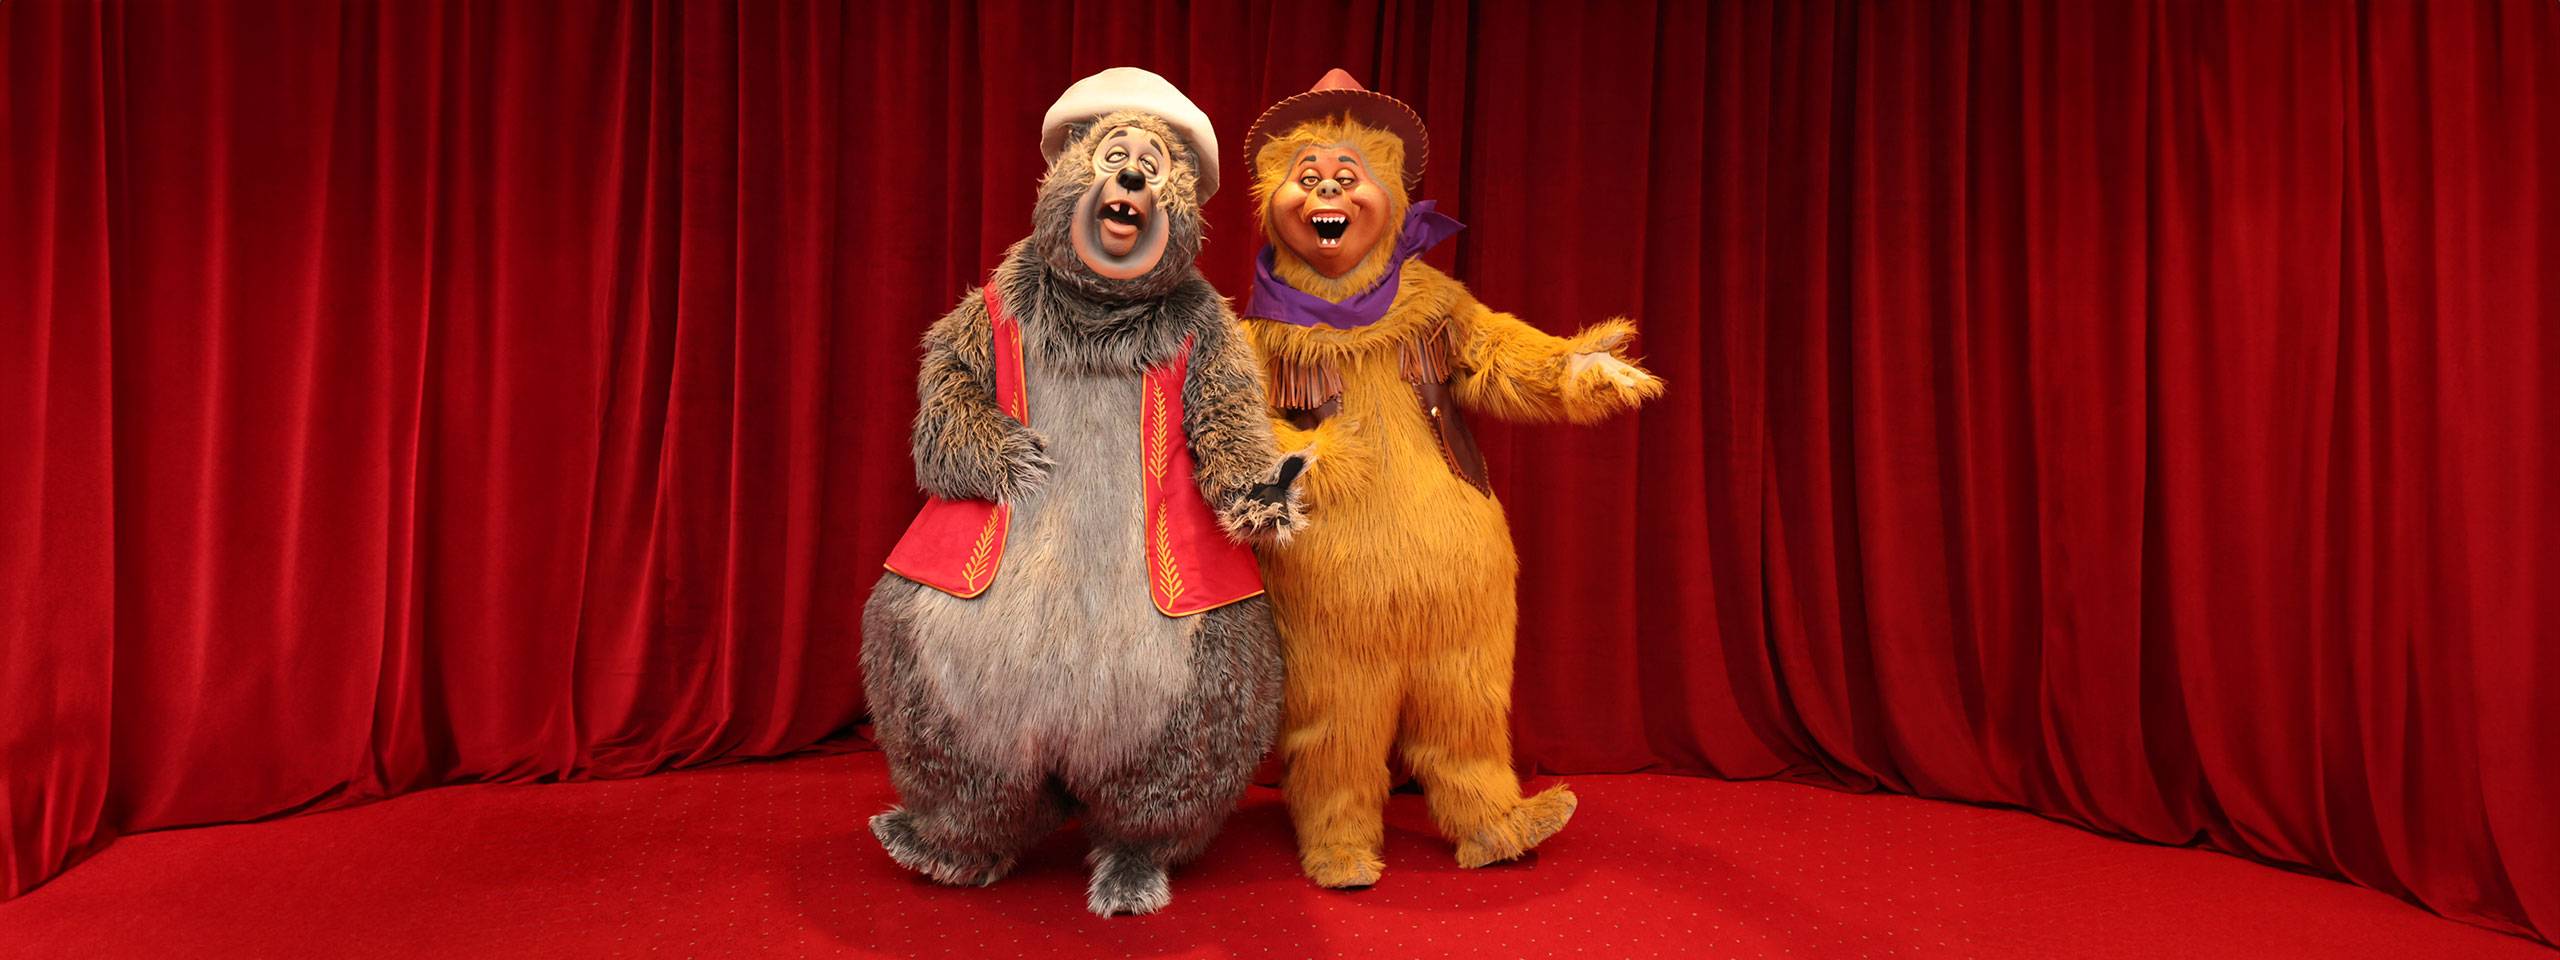 Opening Date Announced For Country Bear Musical Jamboree at Walt Disney World